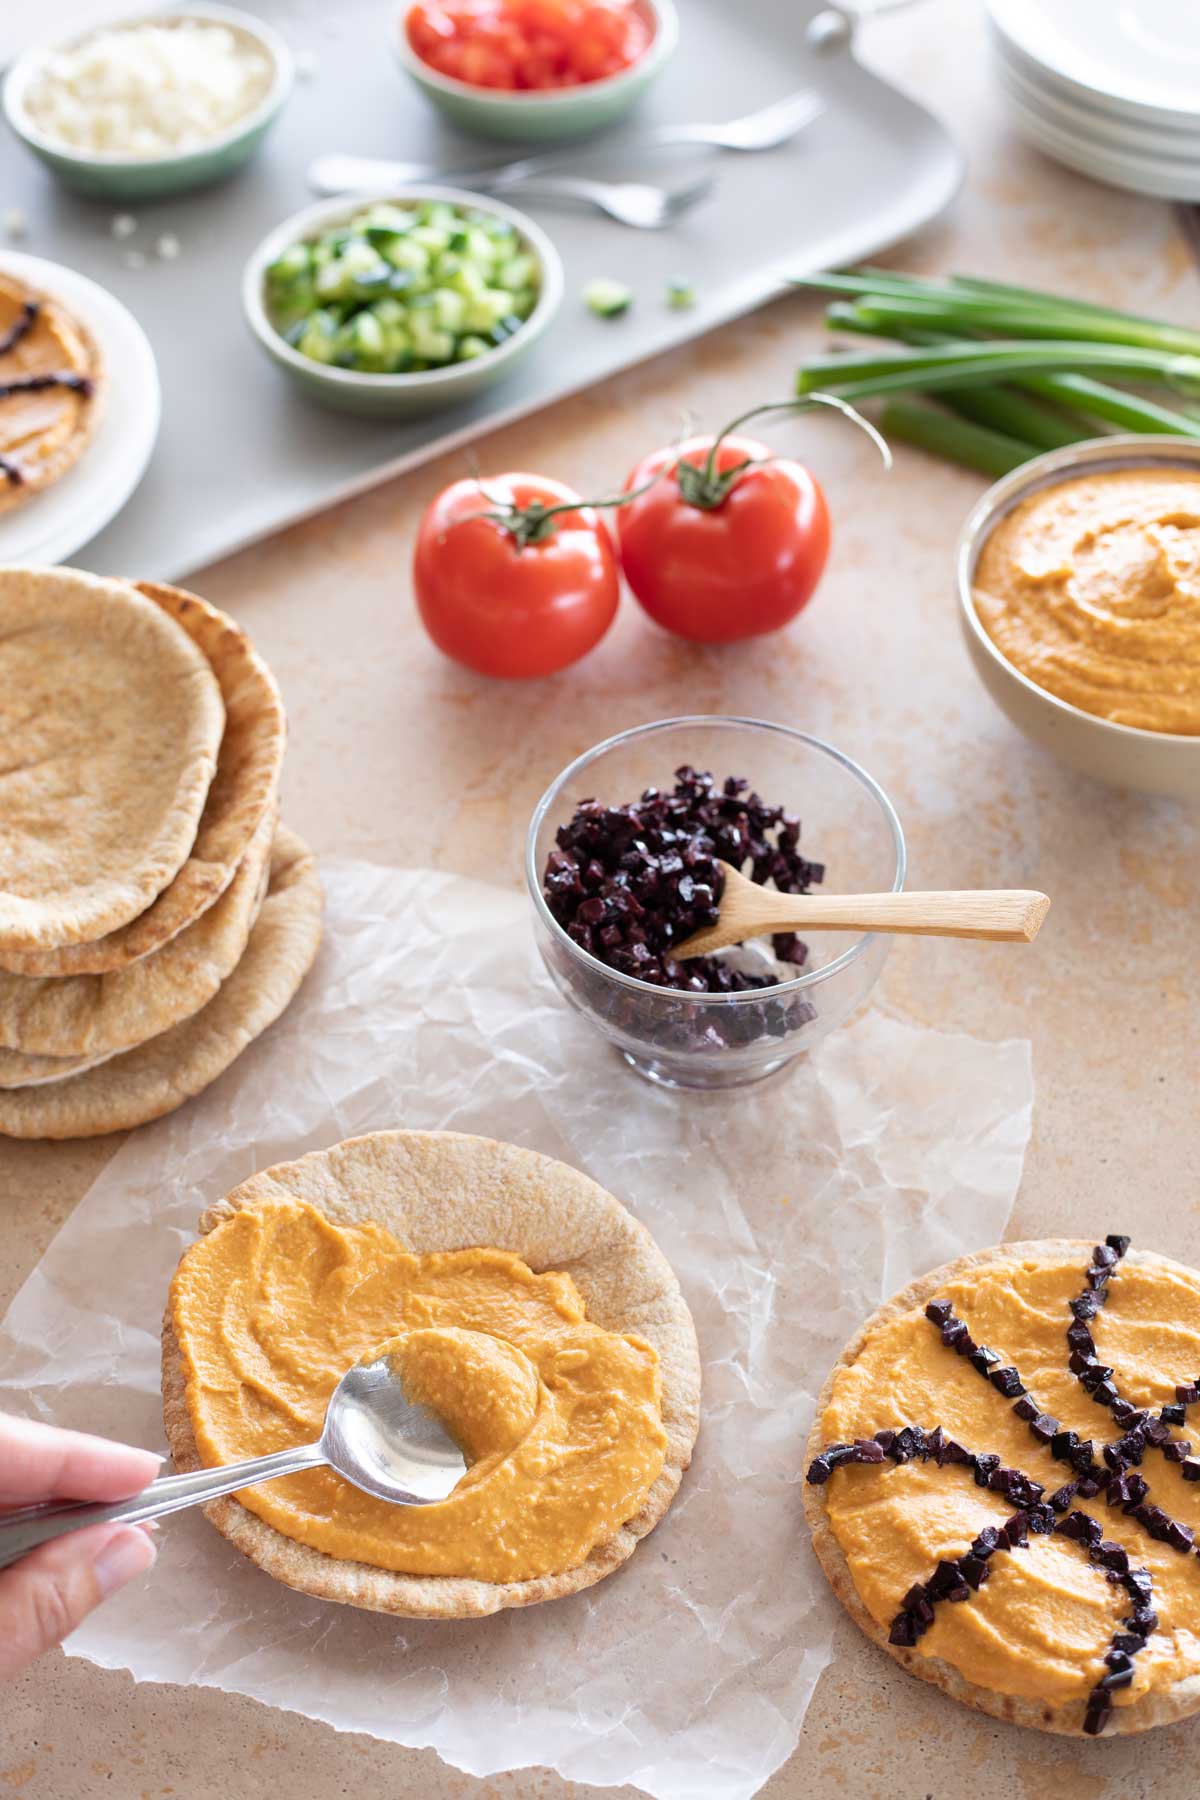 Fingers using spoon to spread hummus on pita, with other ingredients nearby.